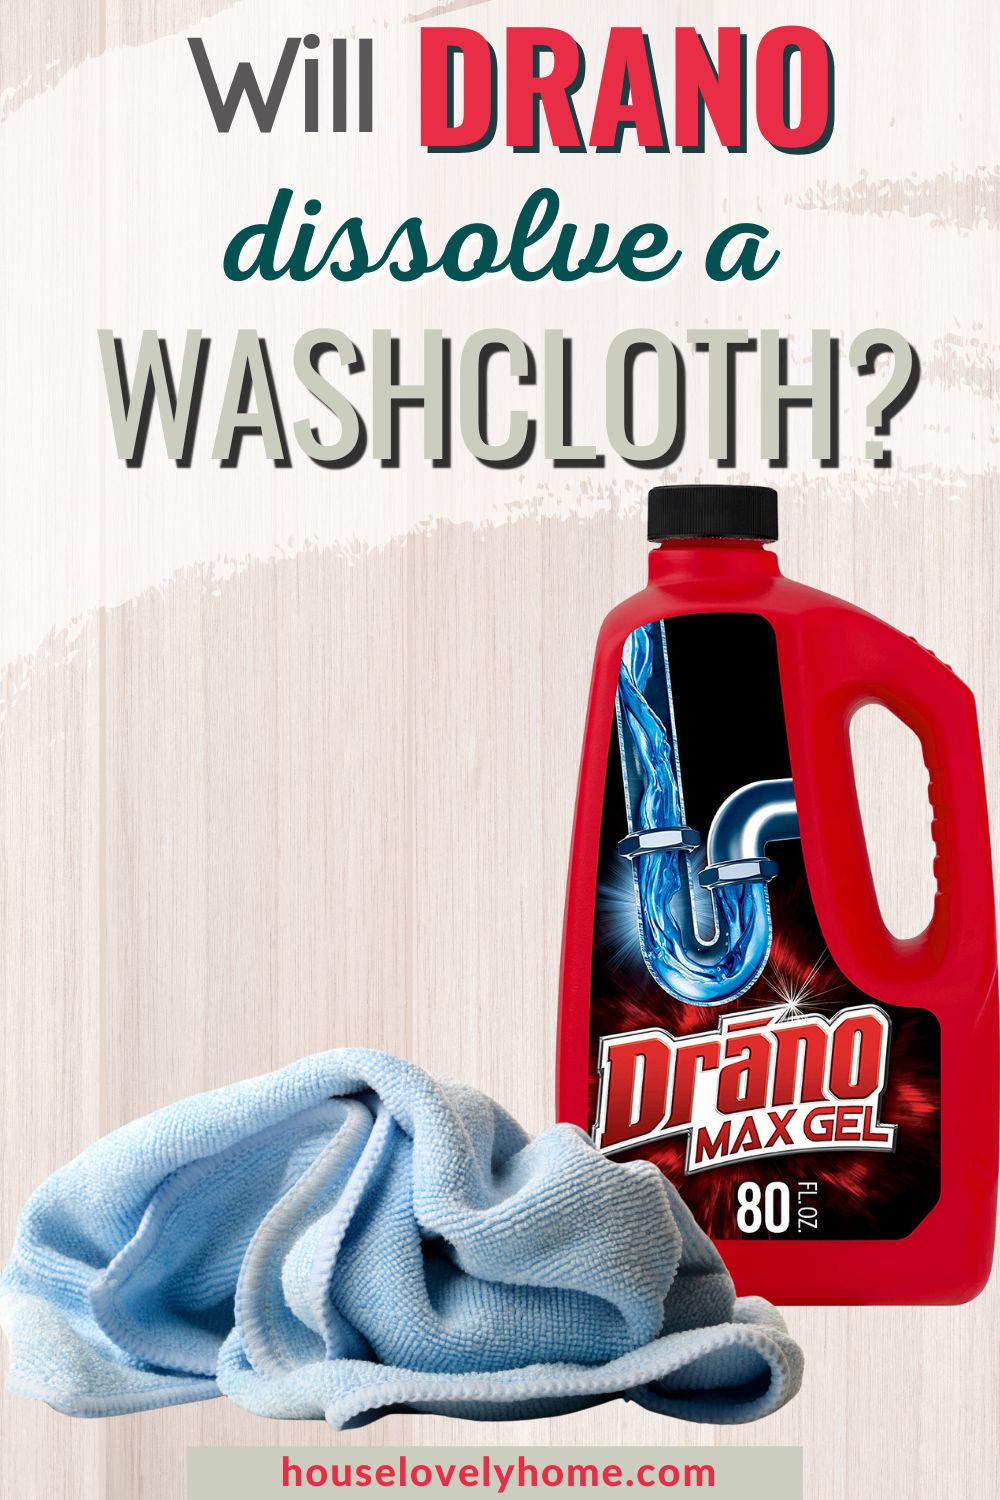 Image showing a washcloth, a red container of drano with text overlay that reads Will Drano Dissolve a Washcloth